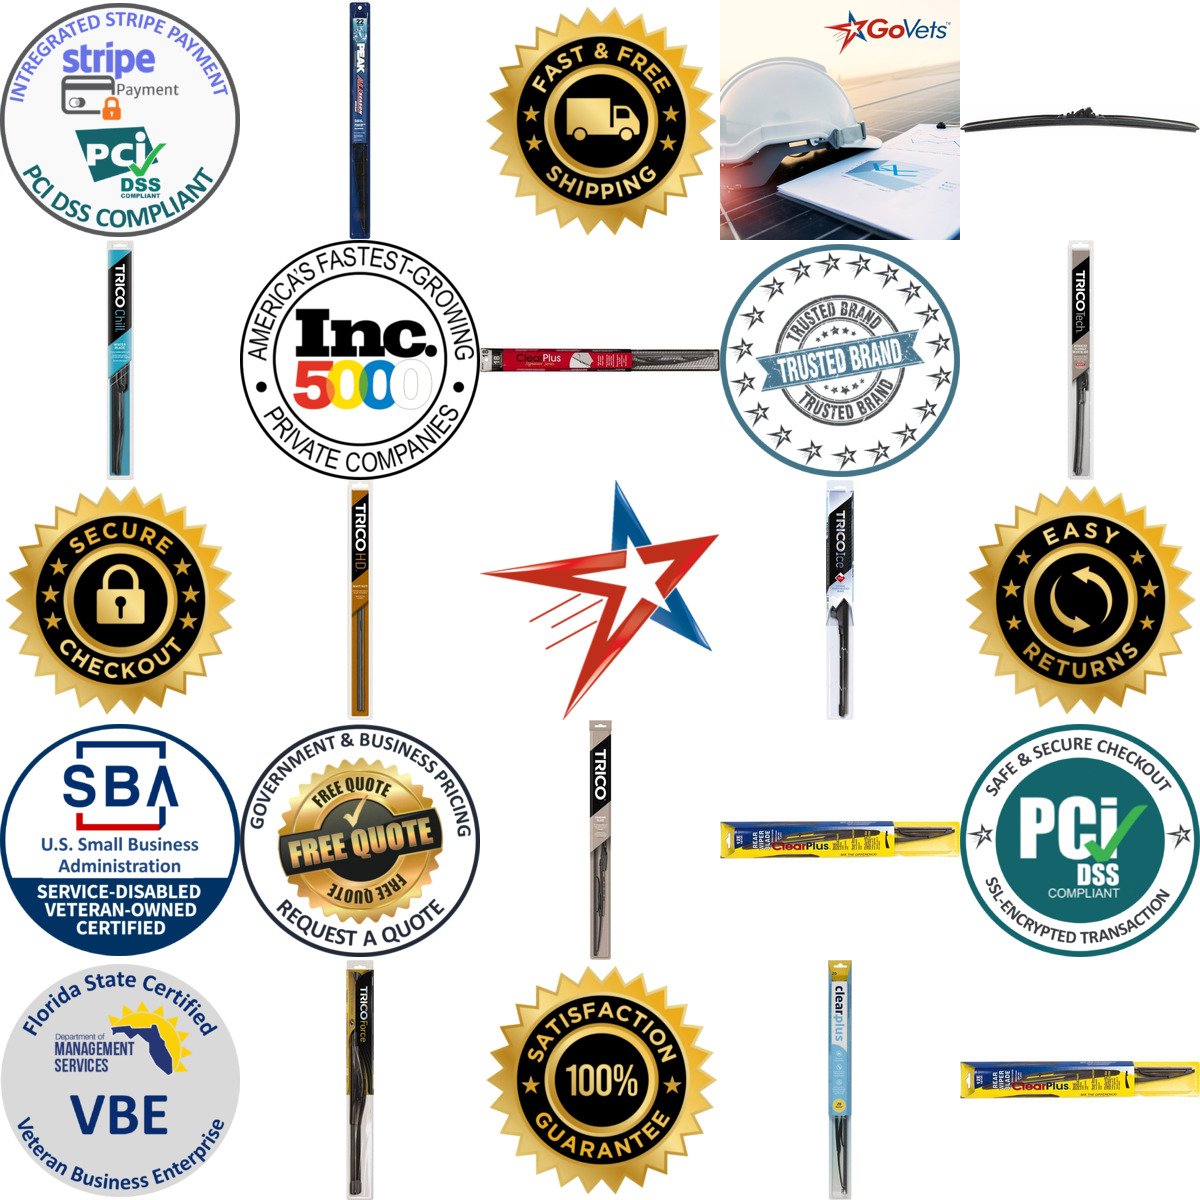 A selection of Windshield Wipers products on GoVets